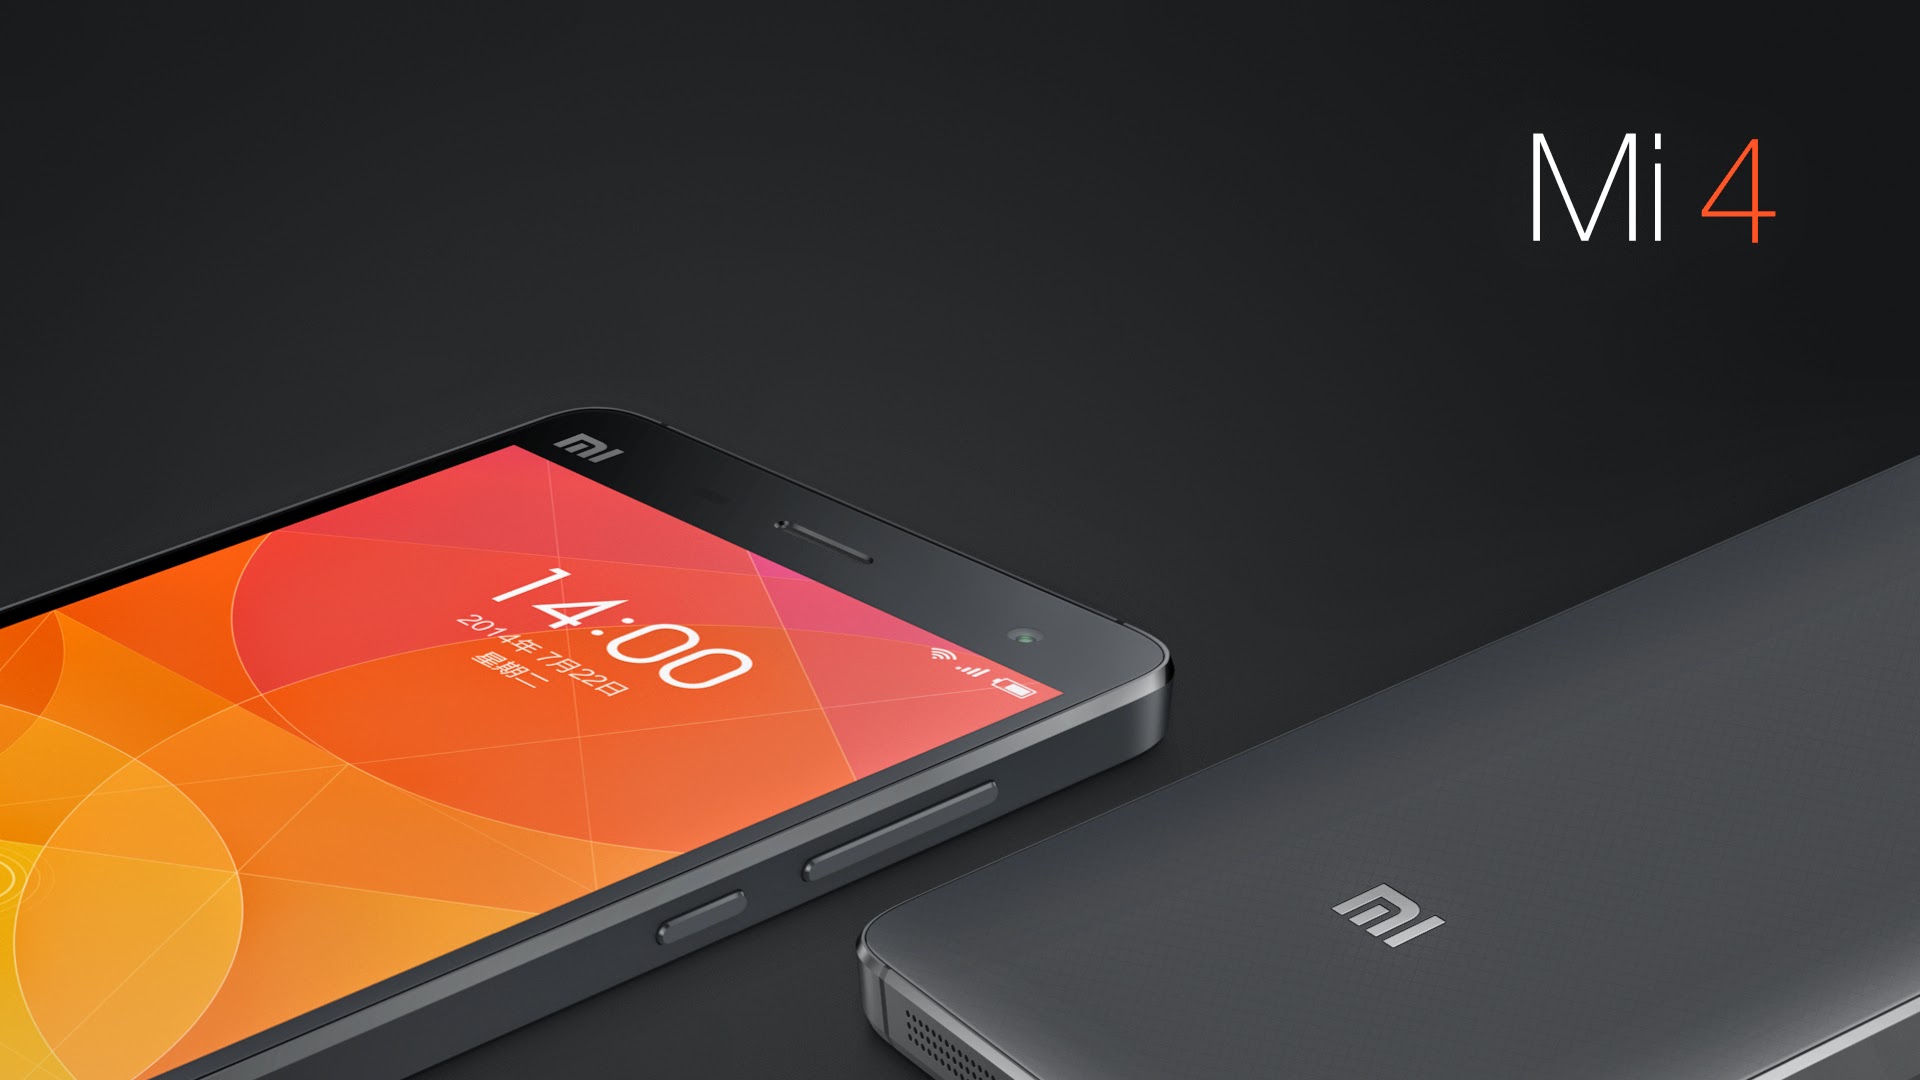 Xiaomi smartwatch to be introduced on November 24th?